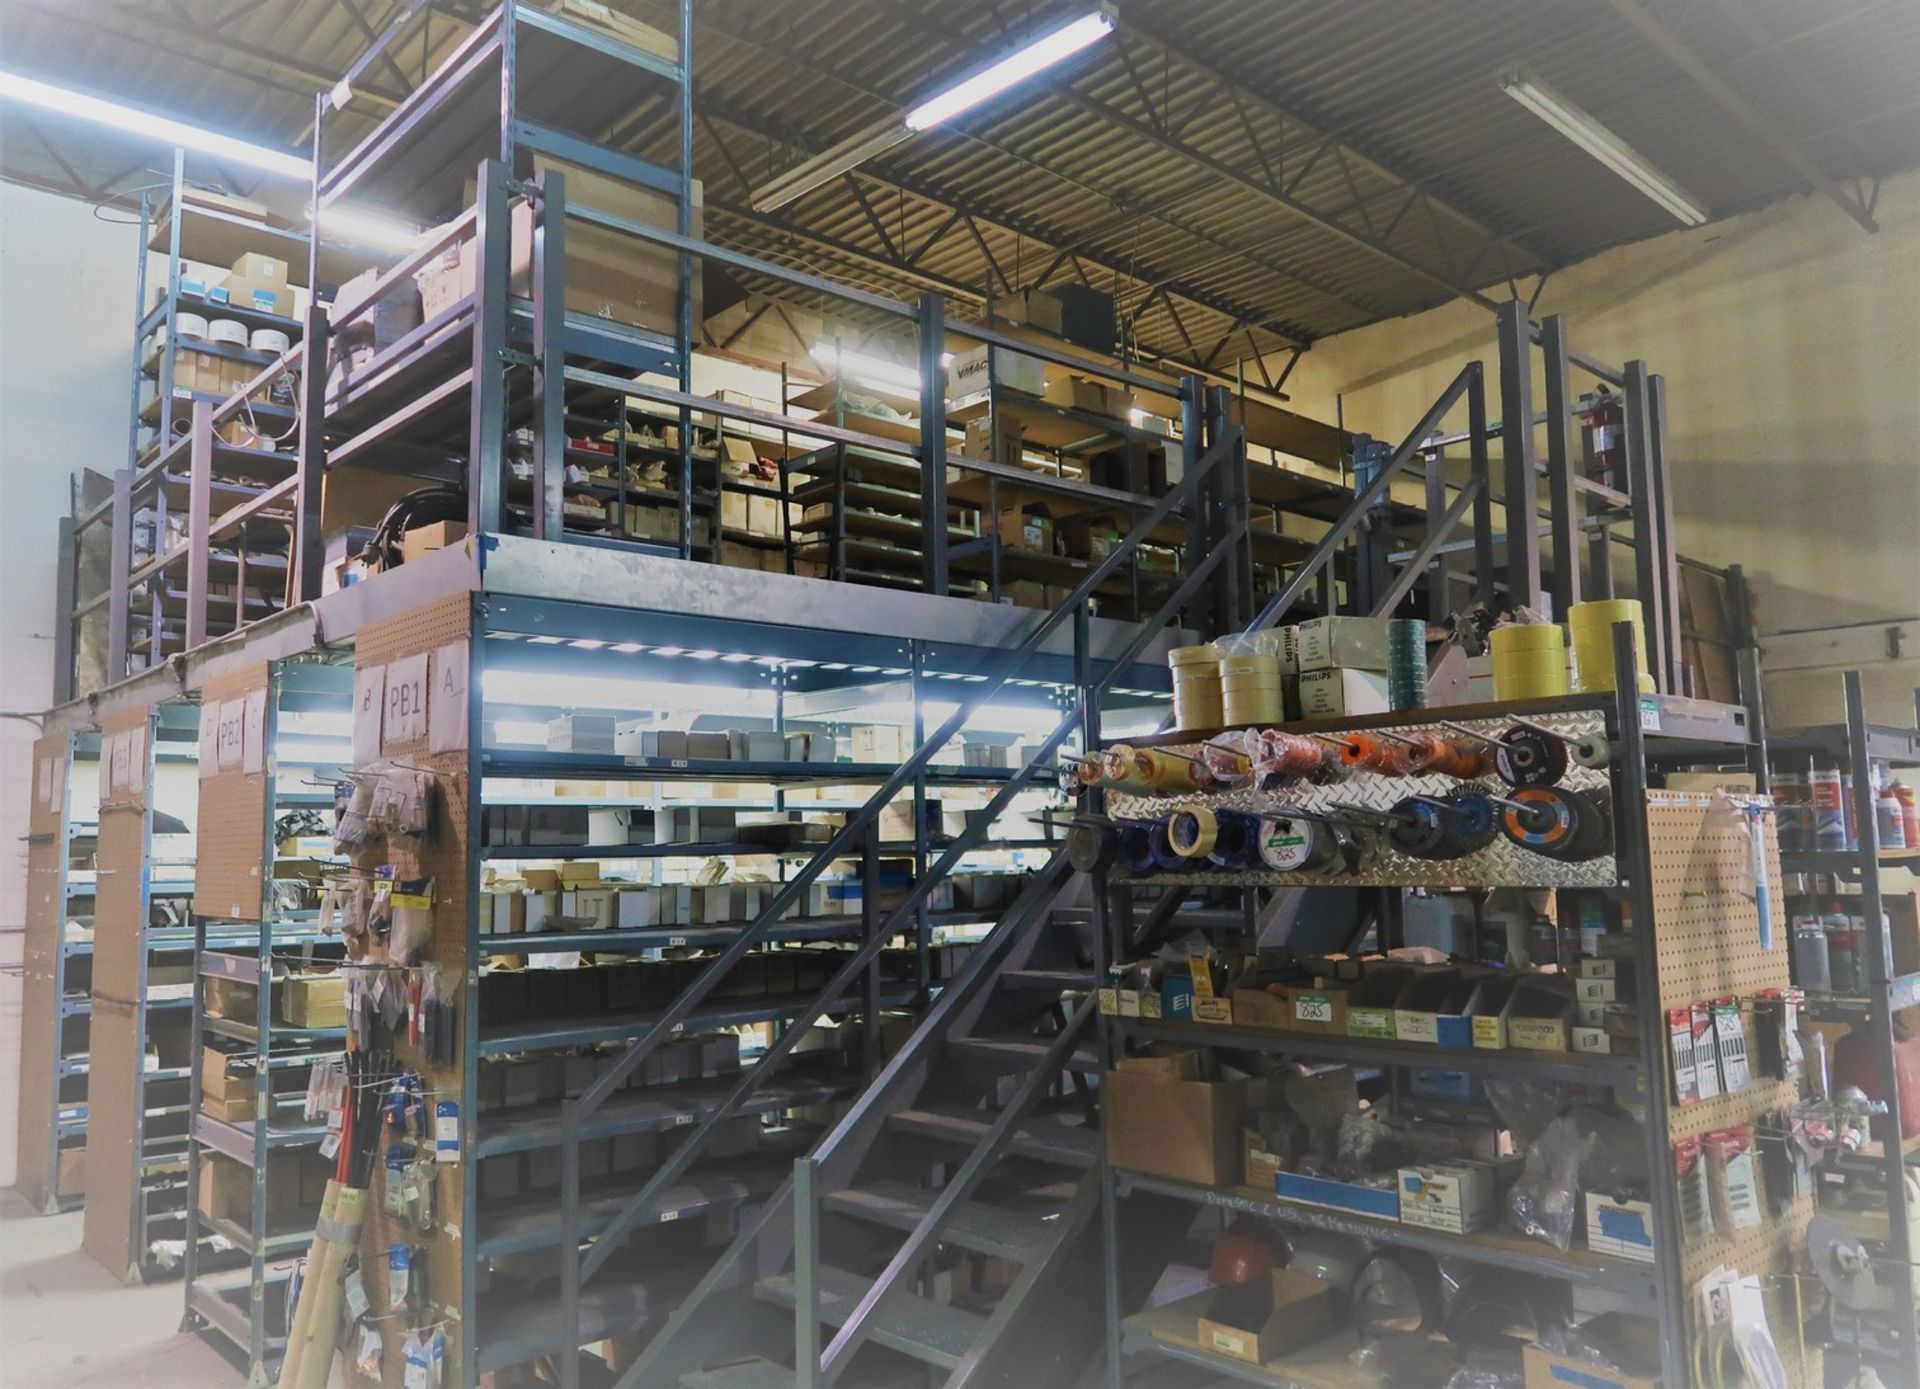 FREE STANDING MEZZANINE SYSTEM W/STAIRS, 4-6 SECTION EZIRACK PARTS SHELVING - Image 2 of 4